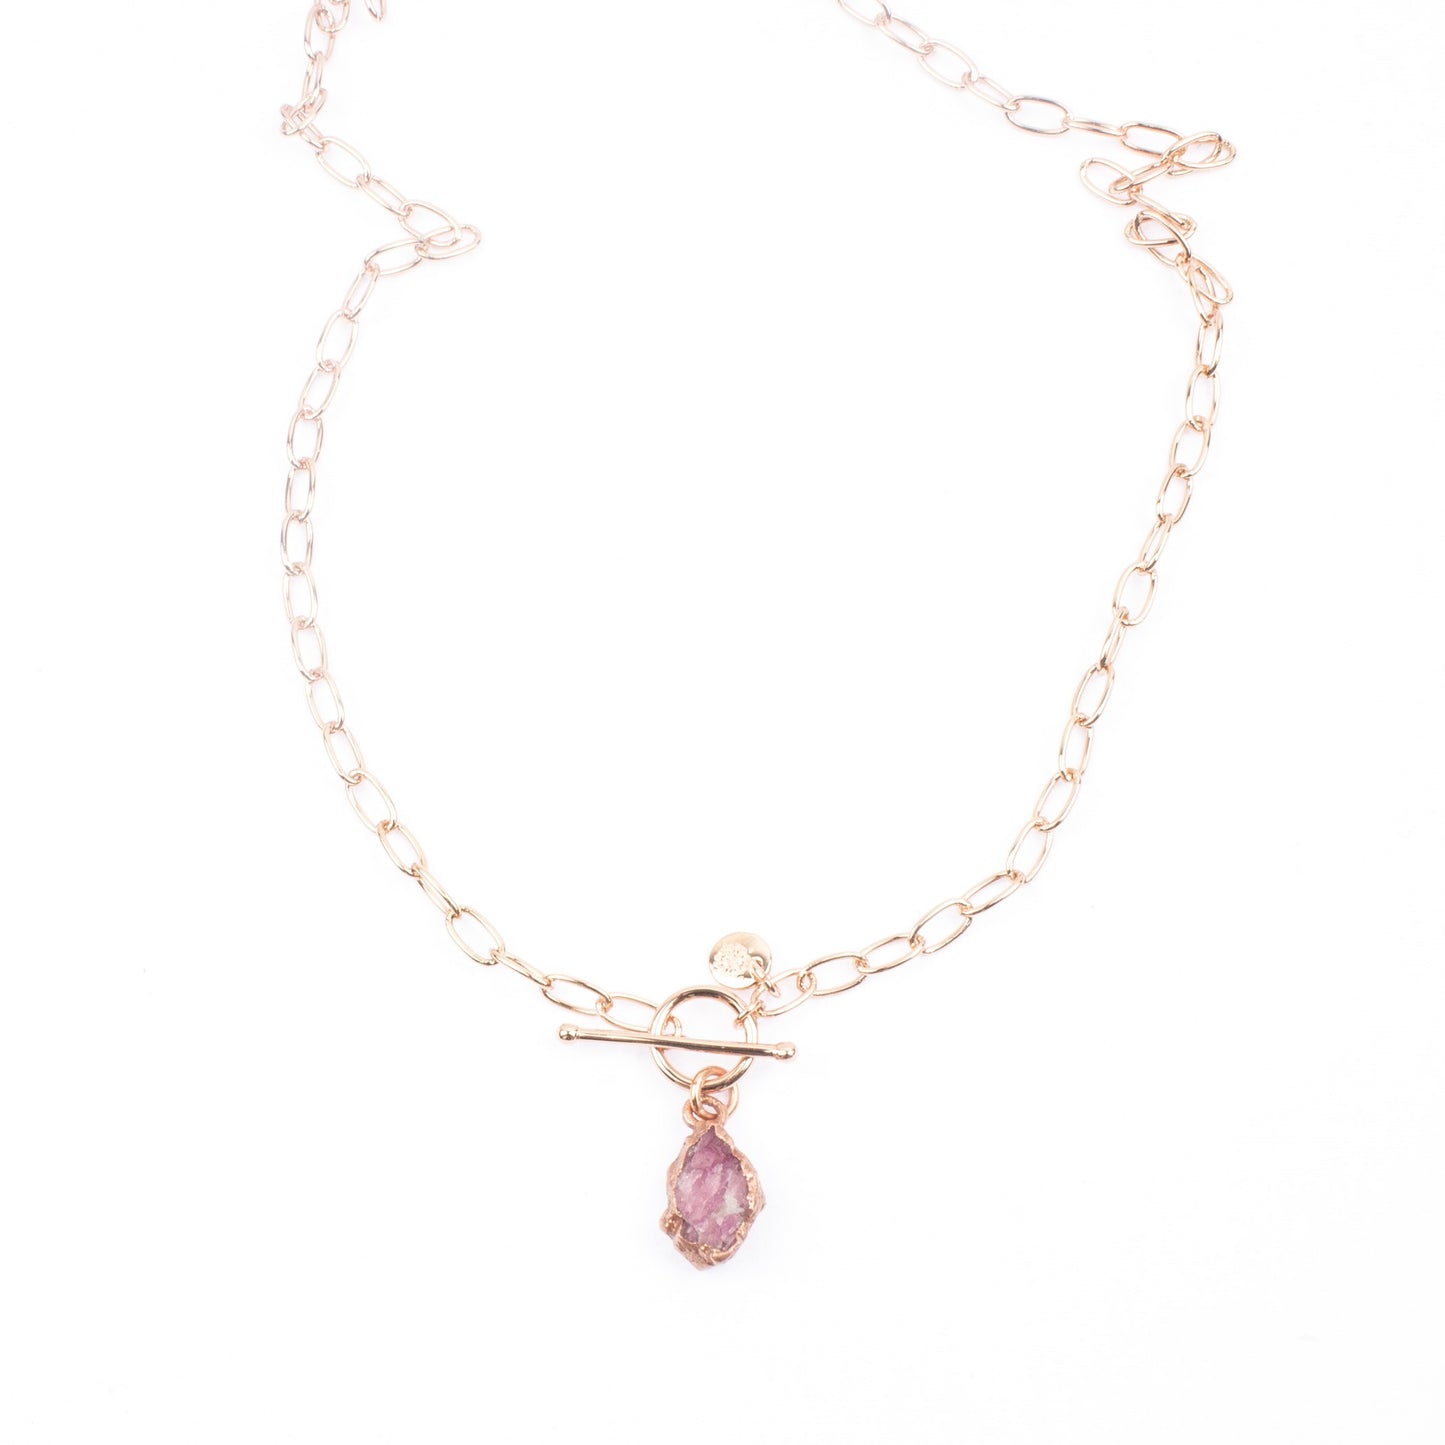 Large Pink Tourmaline Toggle Clasp Necklace (October Birthstone)